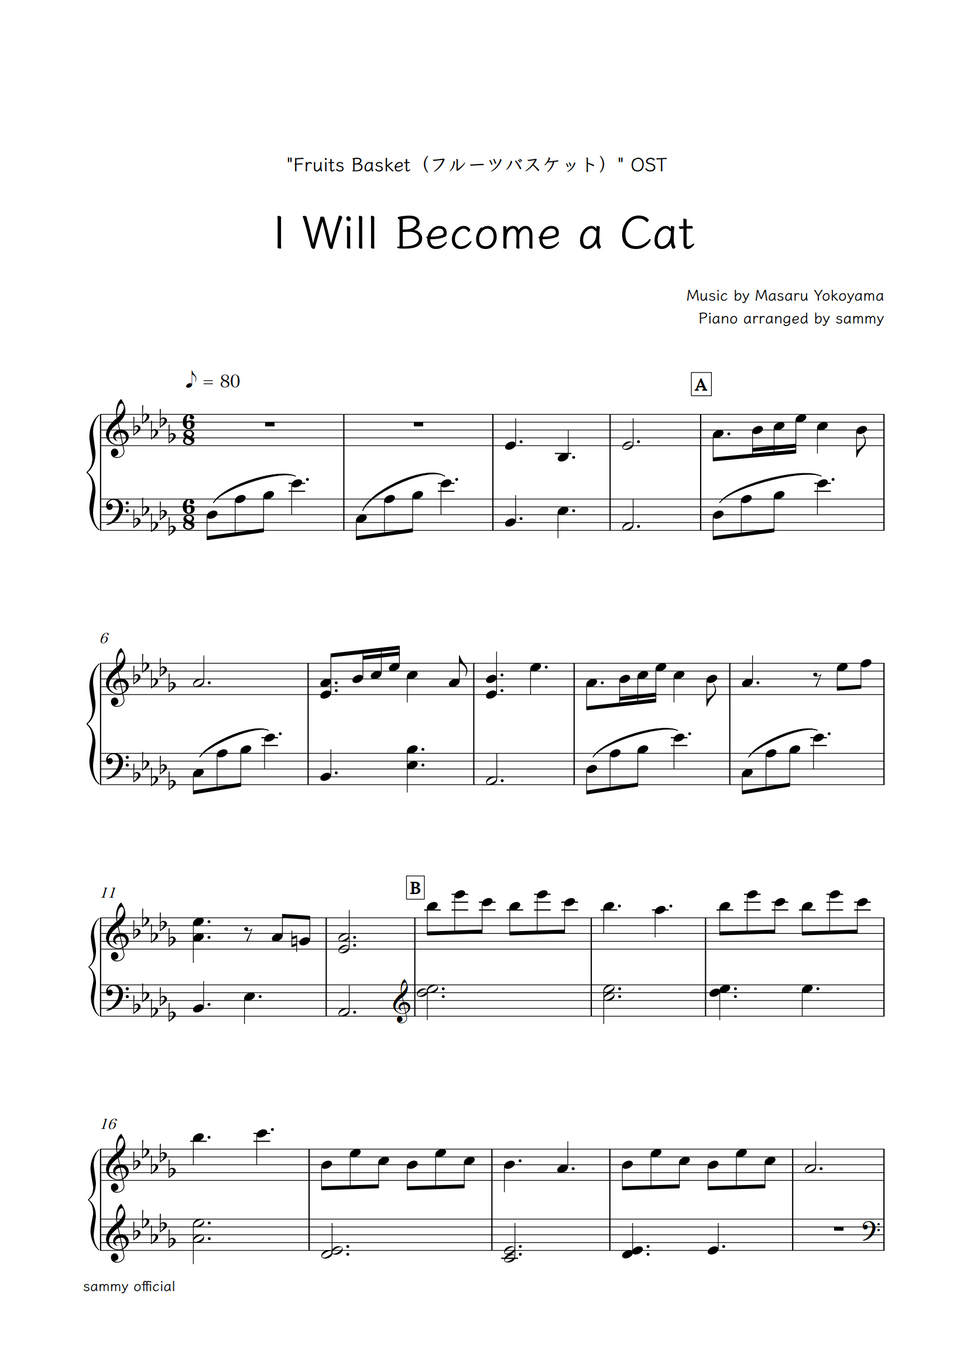 “Fruits Basket（フルーツバスケット）” OST - I Will Become a Cat by sammy